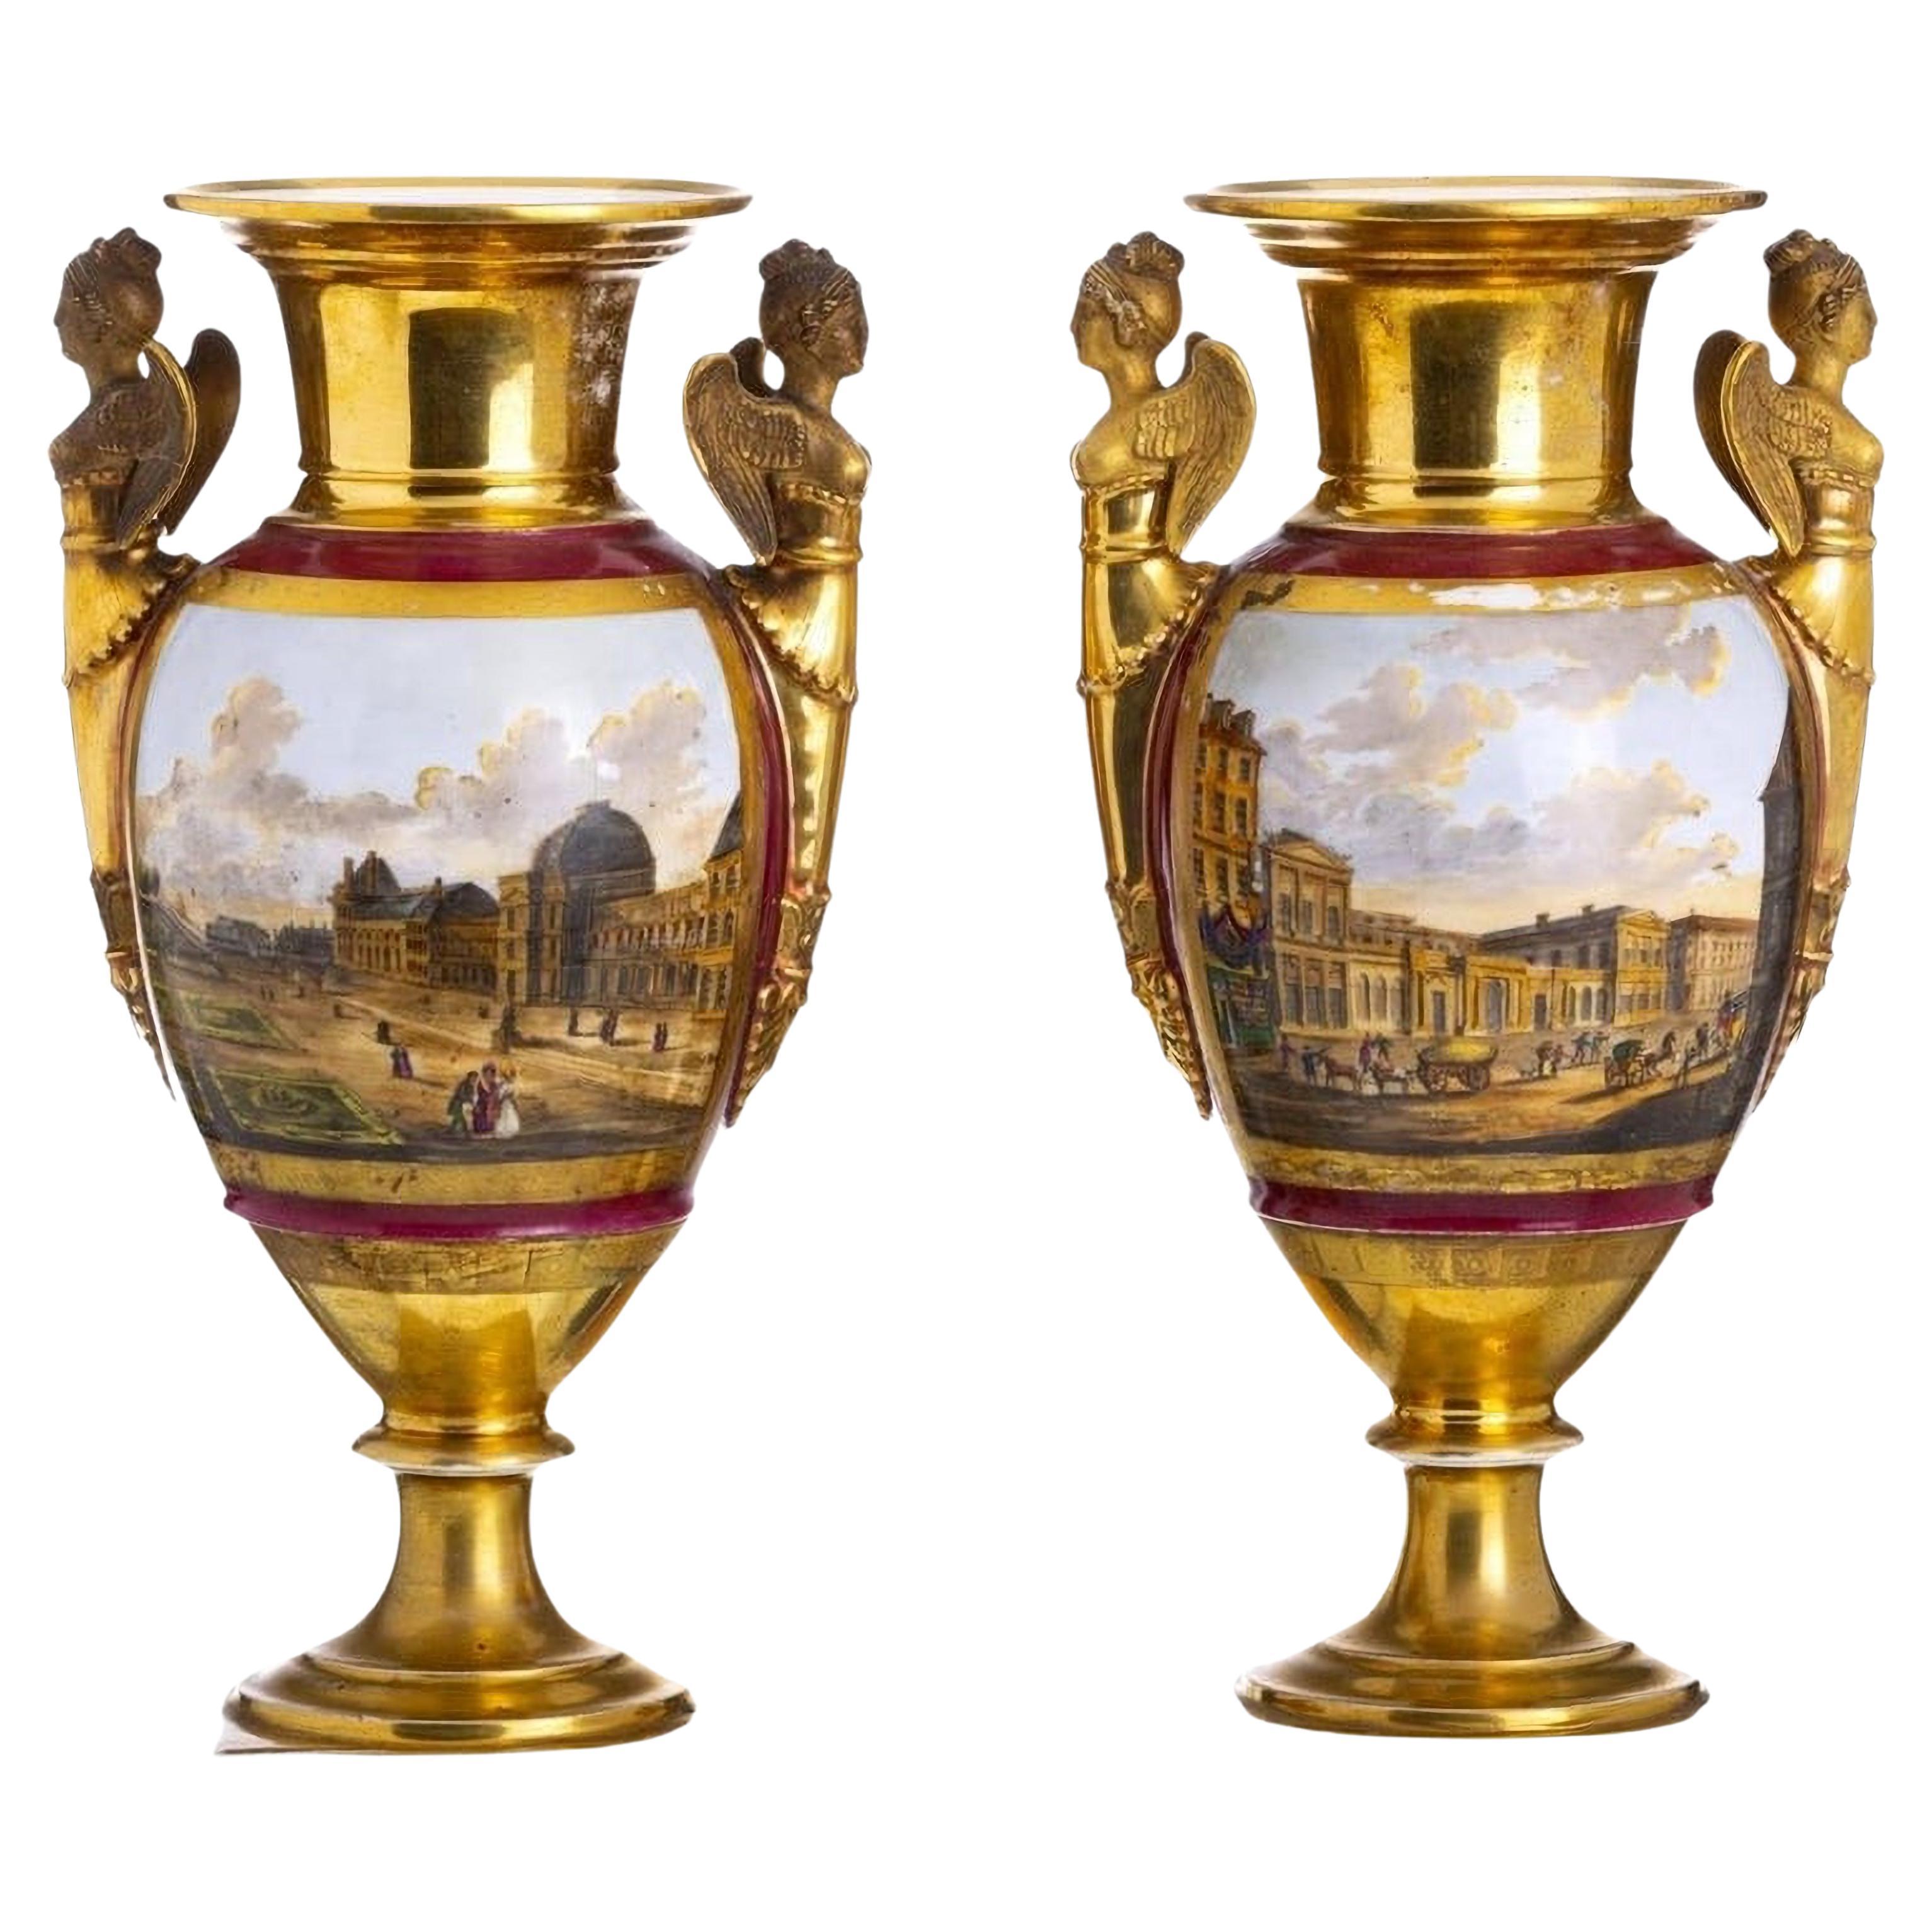 Porcelain from Versailles: Vases for a King & Queen